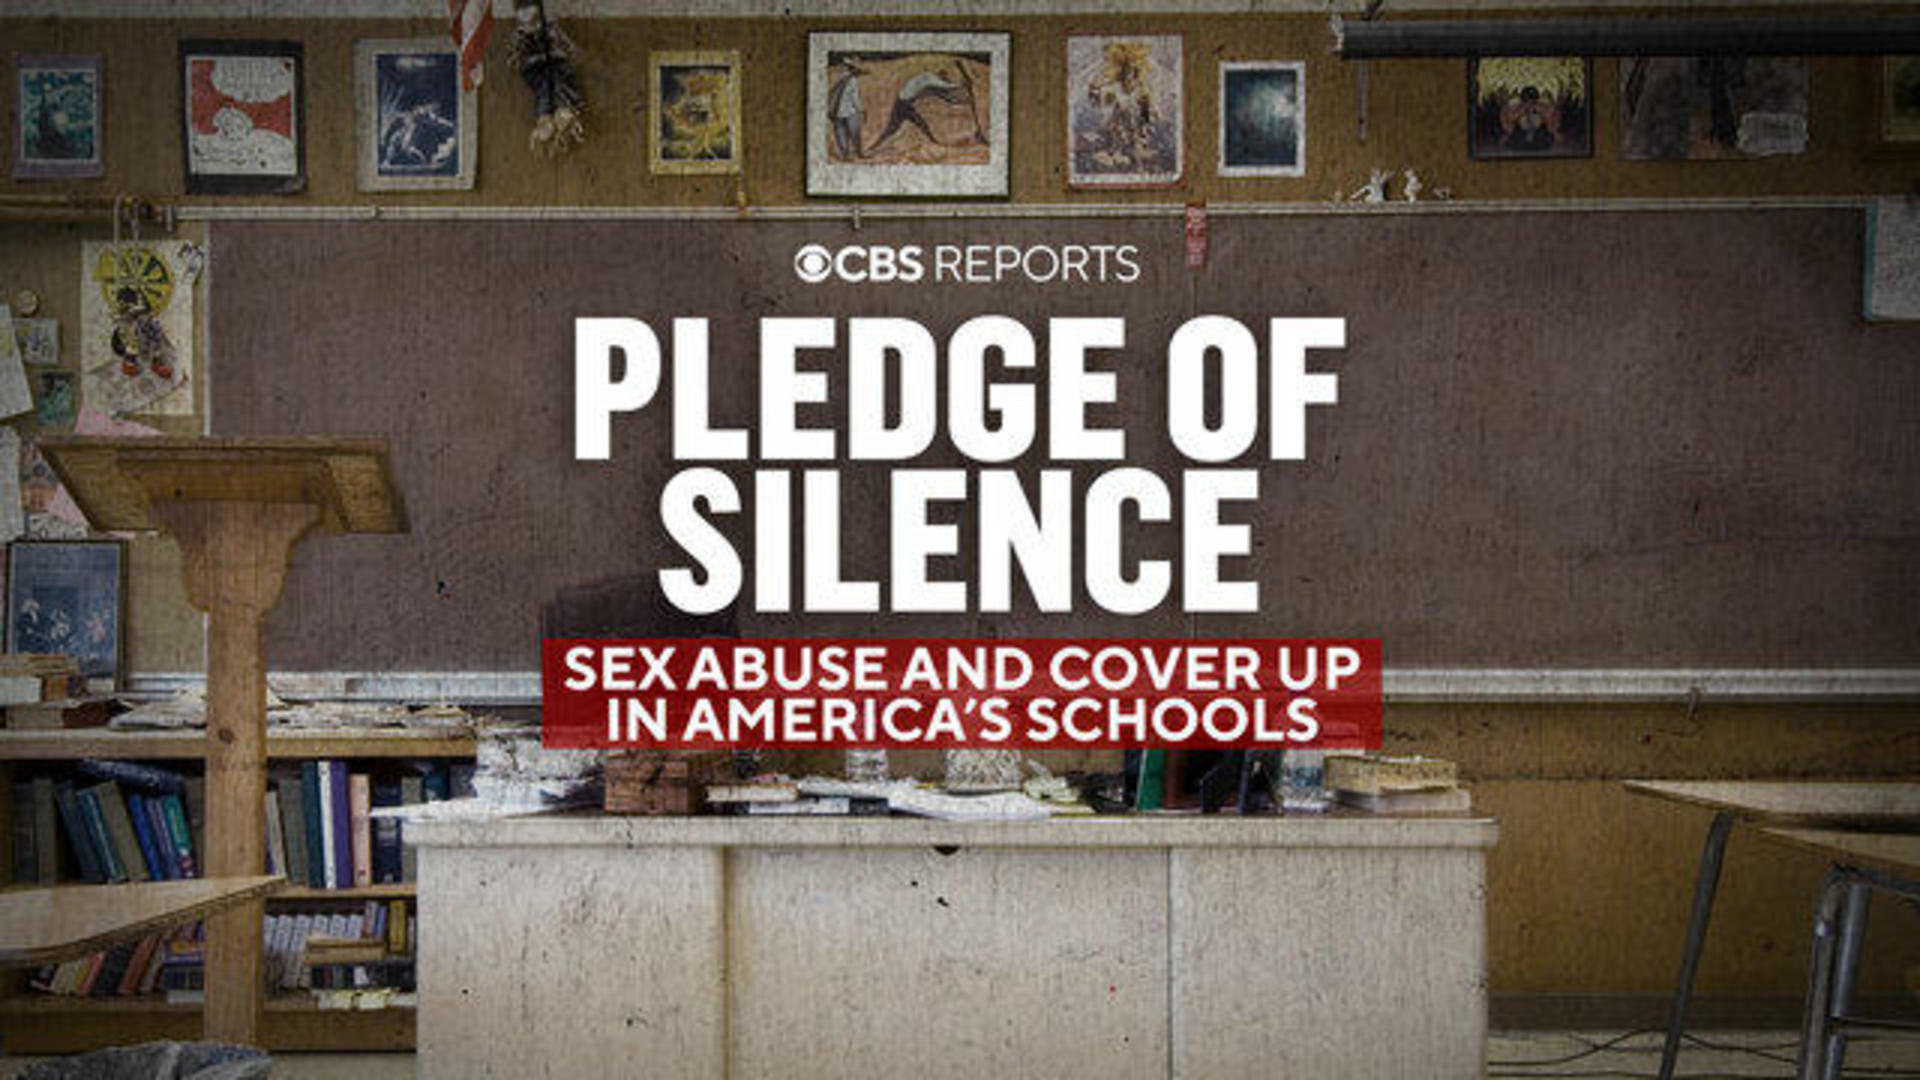 Rep School Xnxx Videos - Pledge of Silence: Sex Abuse and Cover-Up in America's Schools | CBS  Reports - CBS News